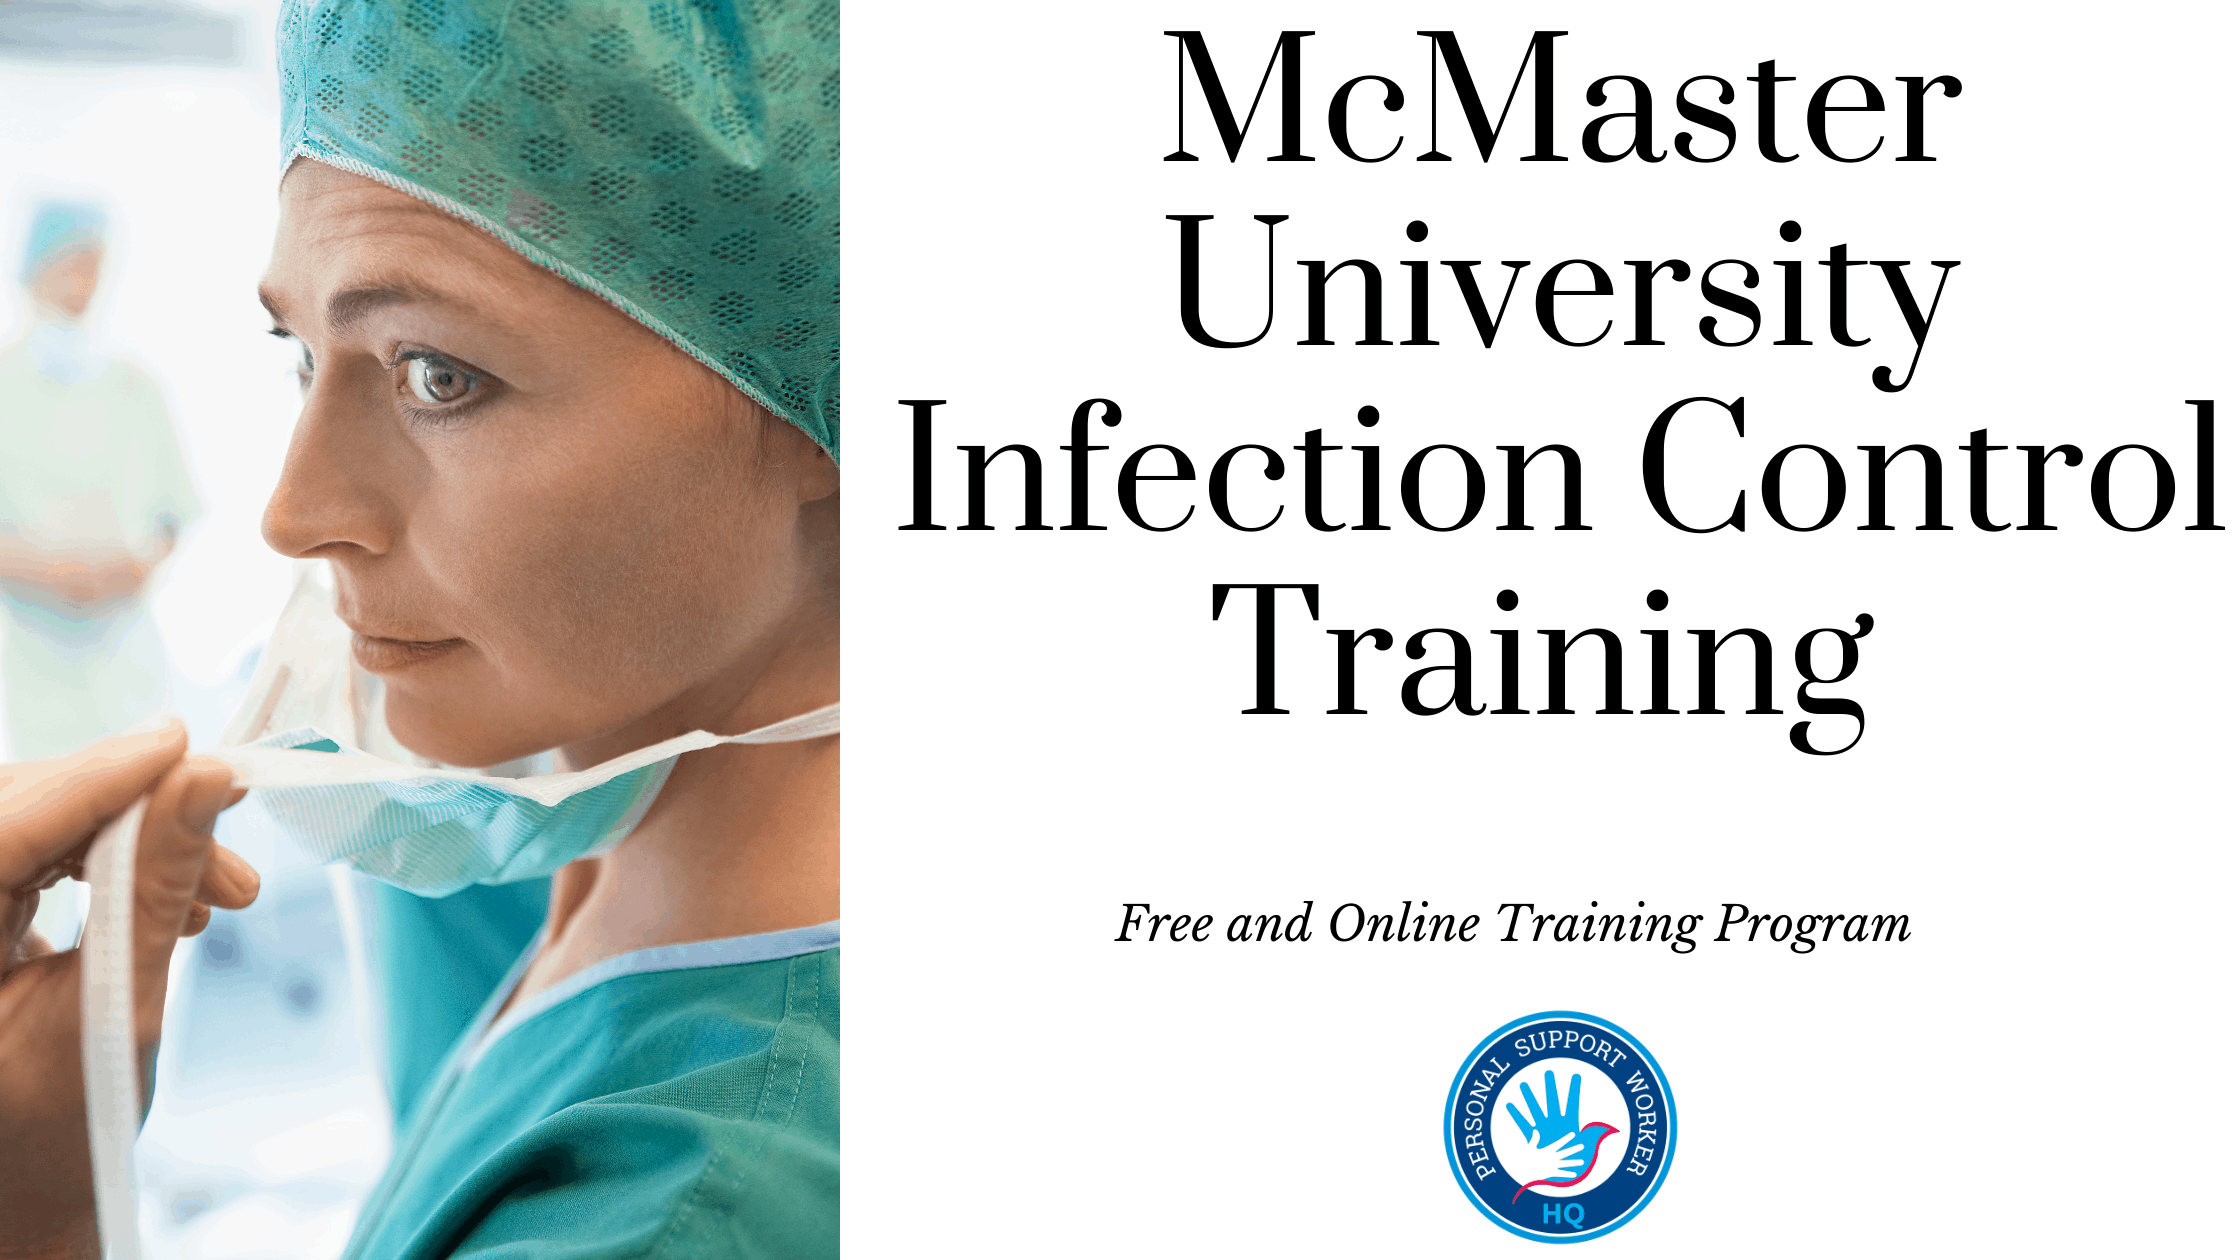 Infection control training by McMaster University